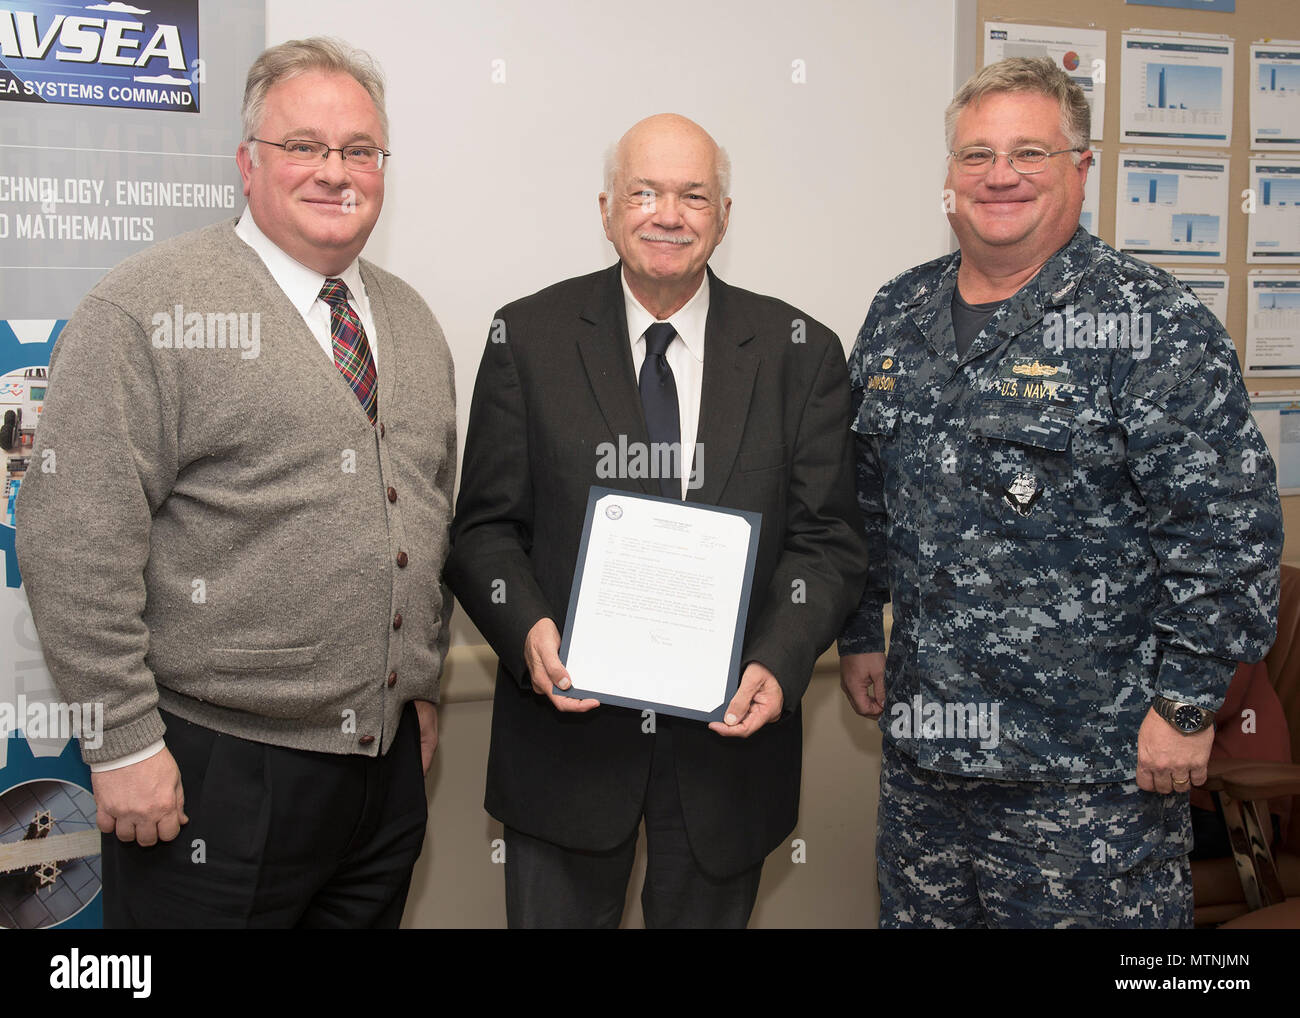 Naval Surface Warfare Center Panama City Division (NSWC PCD) Technical Director Ed Stewart, SES, (left) and NSWC PCD Commanding Officer Capt. Phillip E. Dawson (right), present Office of Research and Technology Applications (ORTA) Manager, Ed Linsemeyer (center), a Letter of Appreciation from Naval Sea Systems Command (NAVSEA) for his outstanding dedication to the Science, Technology, Engineering and Mathematics Program Jan. 9, 2017. Stock Photo